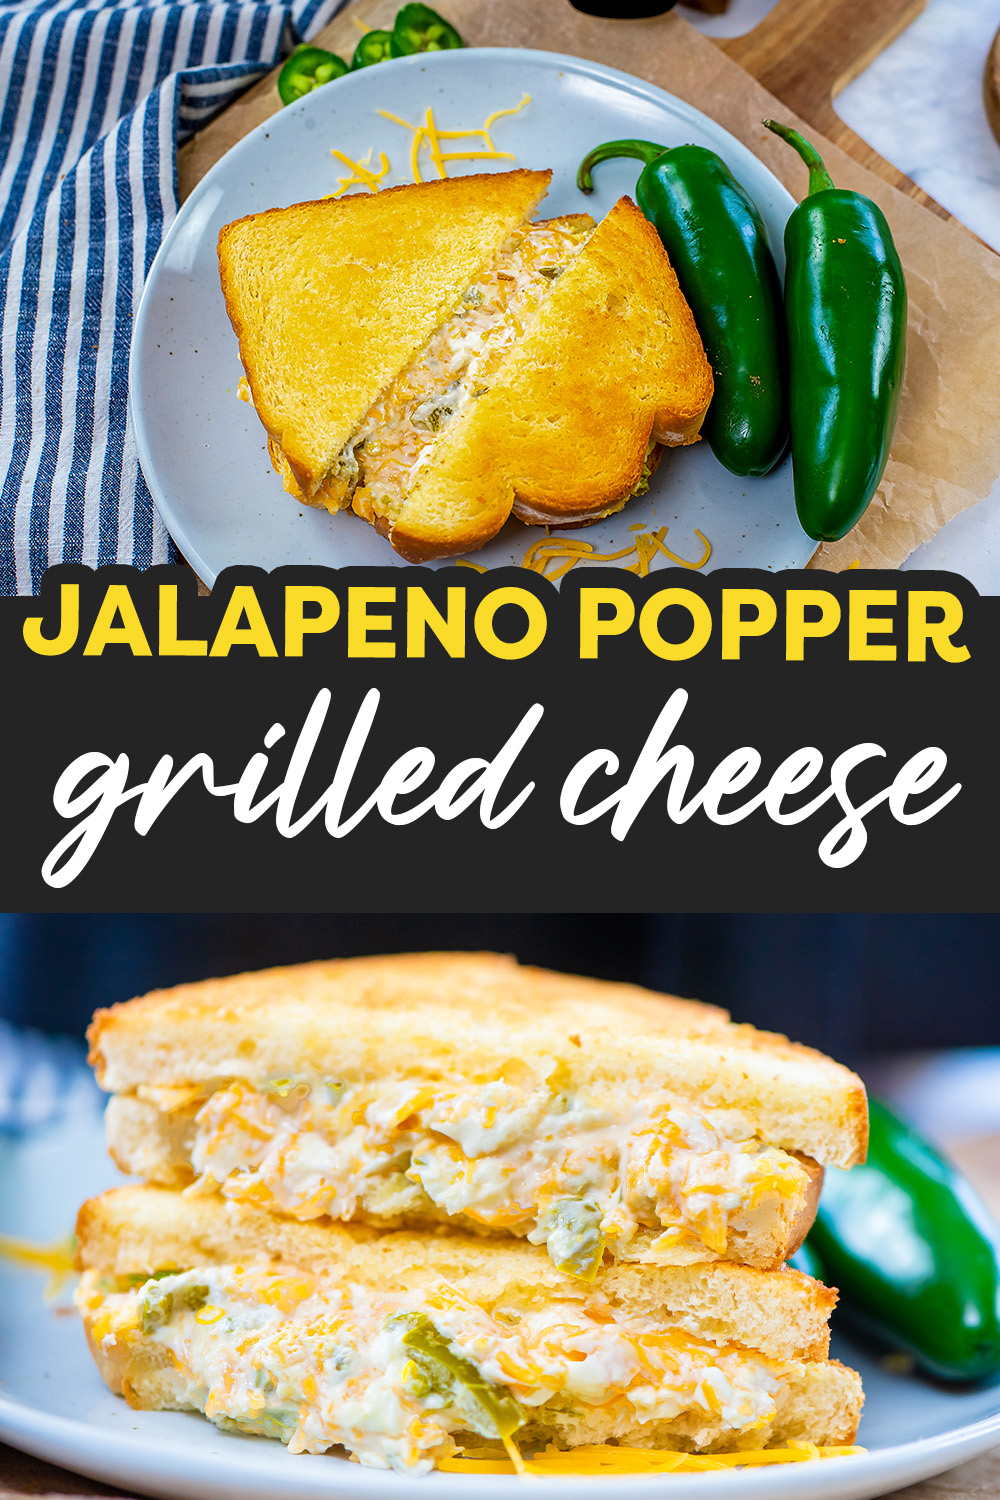 These jalapeno popper grilled cheese have a sweet spice to the them!  Great hack for the traditonal grilled cheese!